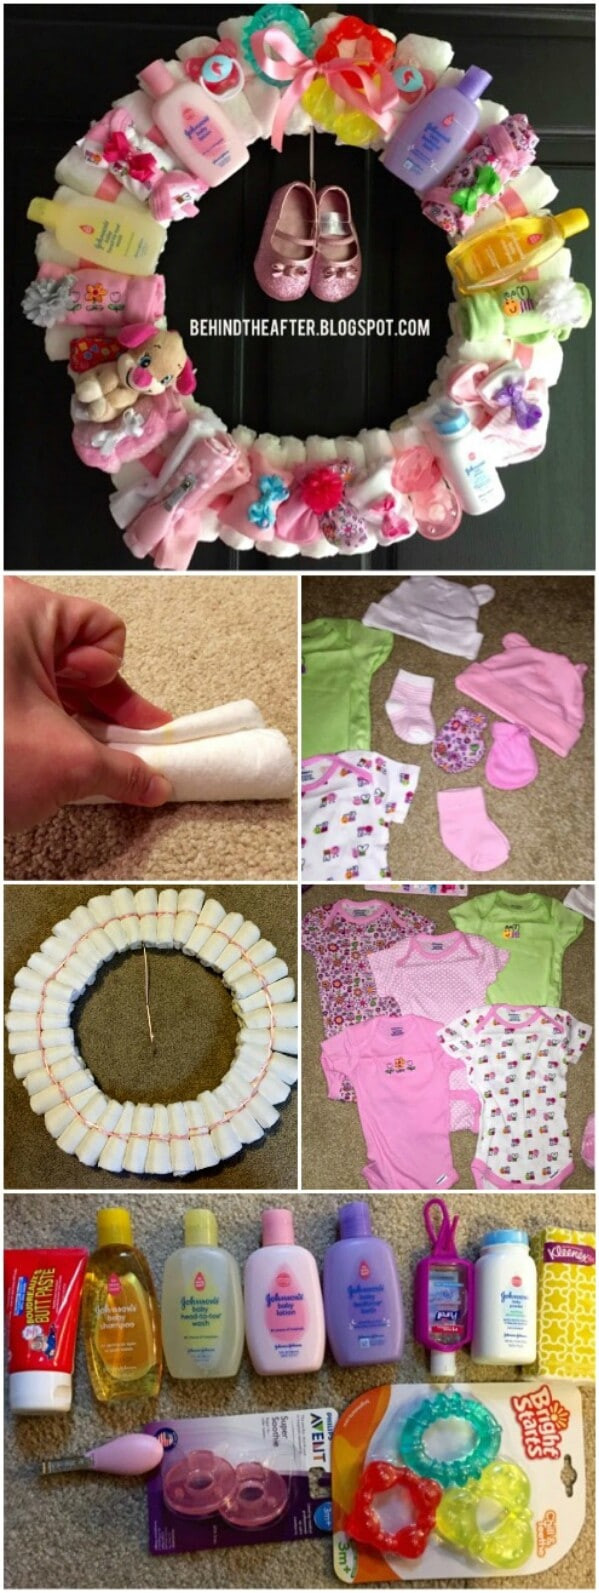 Baby Girl Gifts For Baby Shower
 25 Enchantingly Adorable Baby Shower Gift Ideas That Will